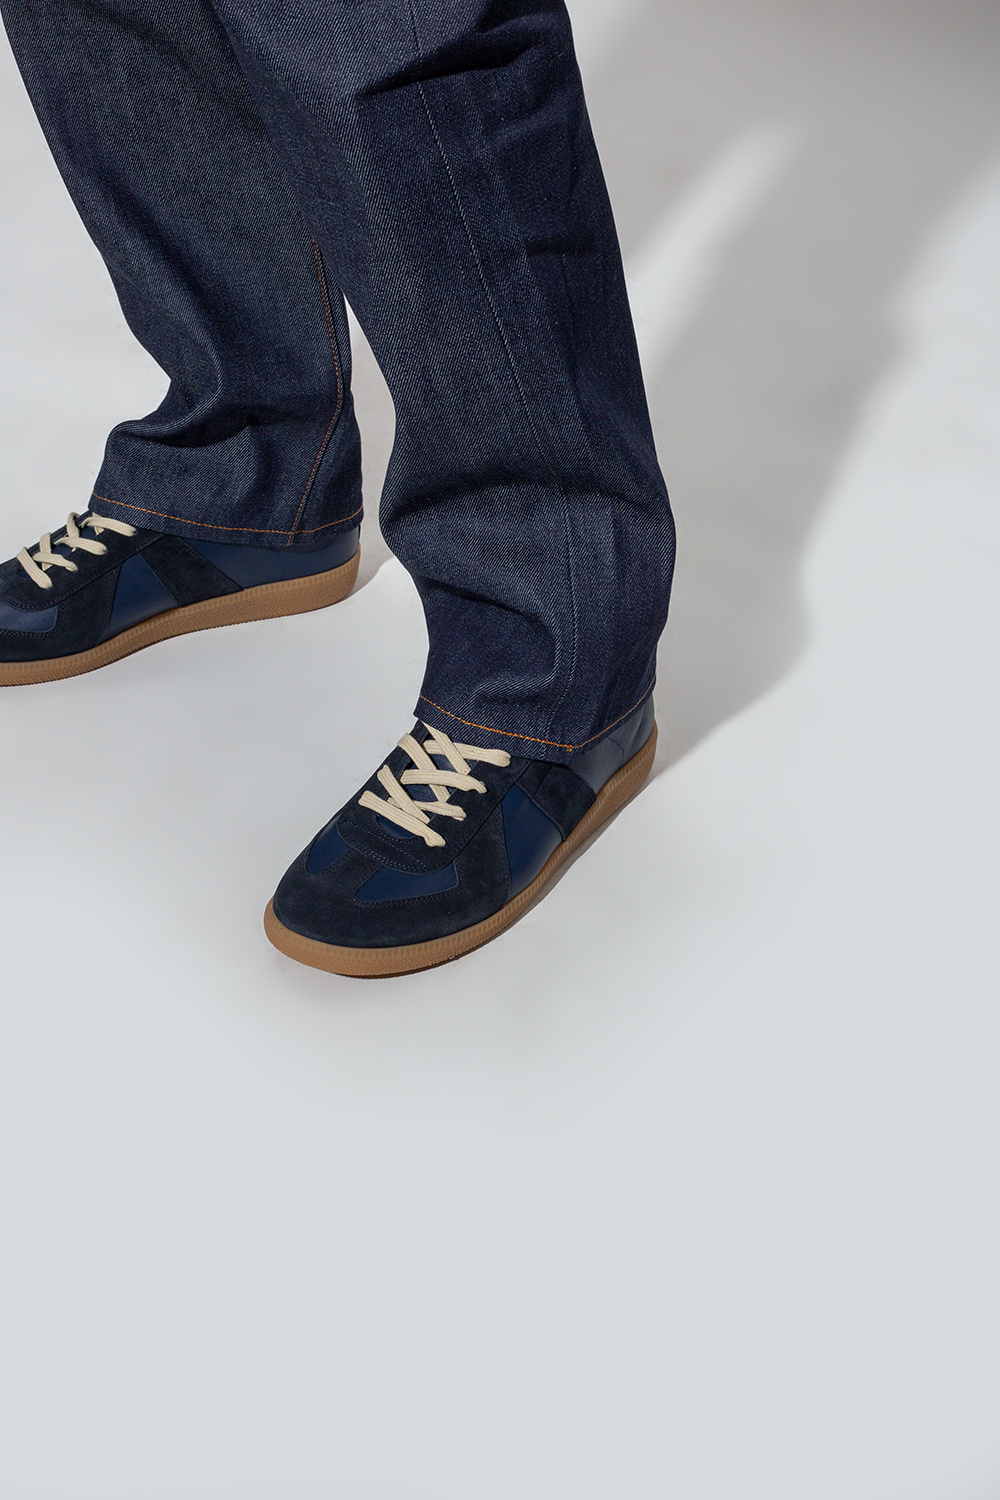 Navy blue 'Replica' sneakers Maison Margiela - Bring a chic touch